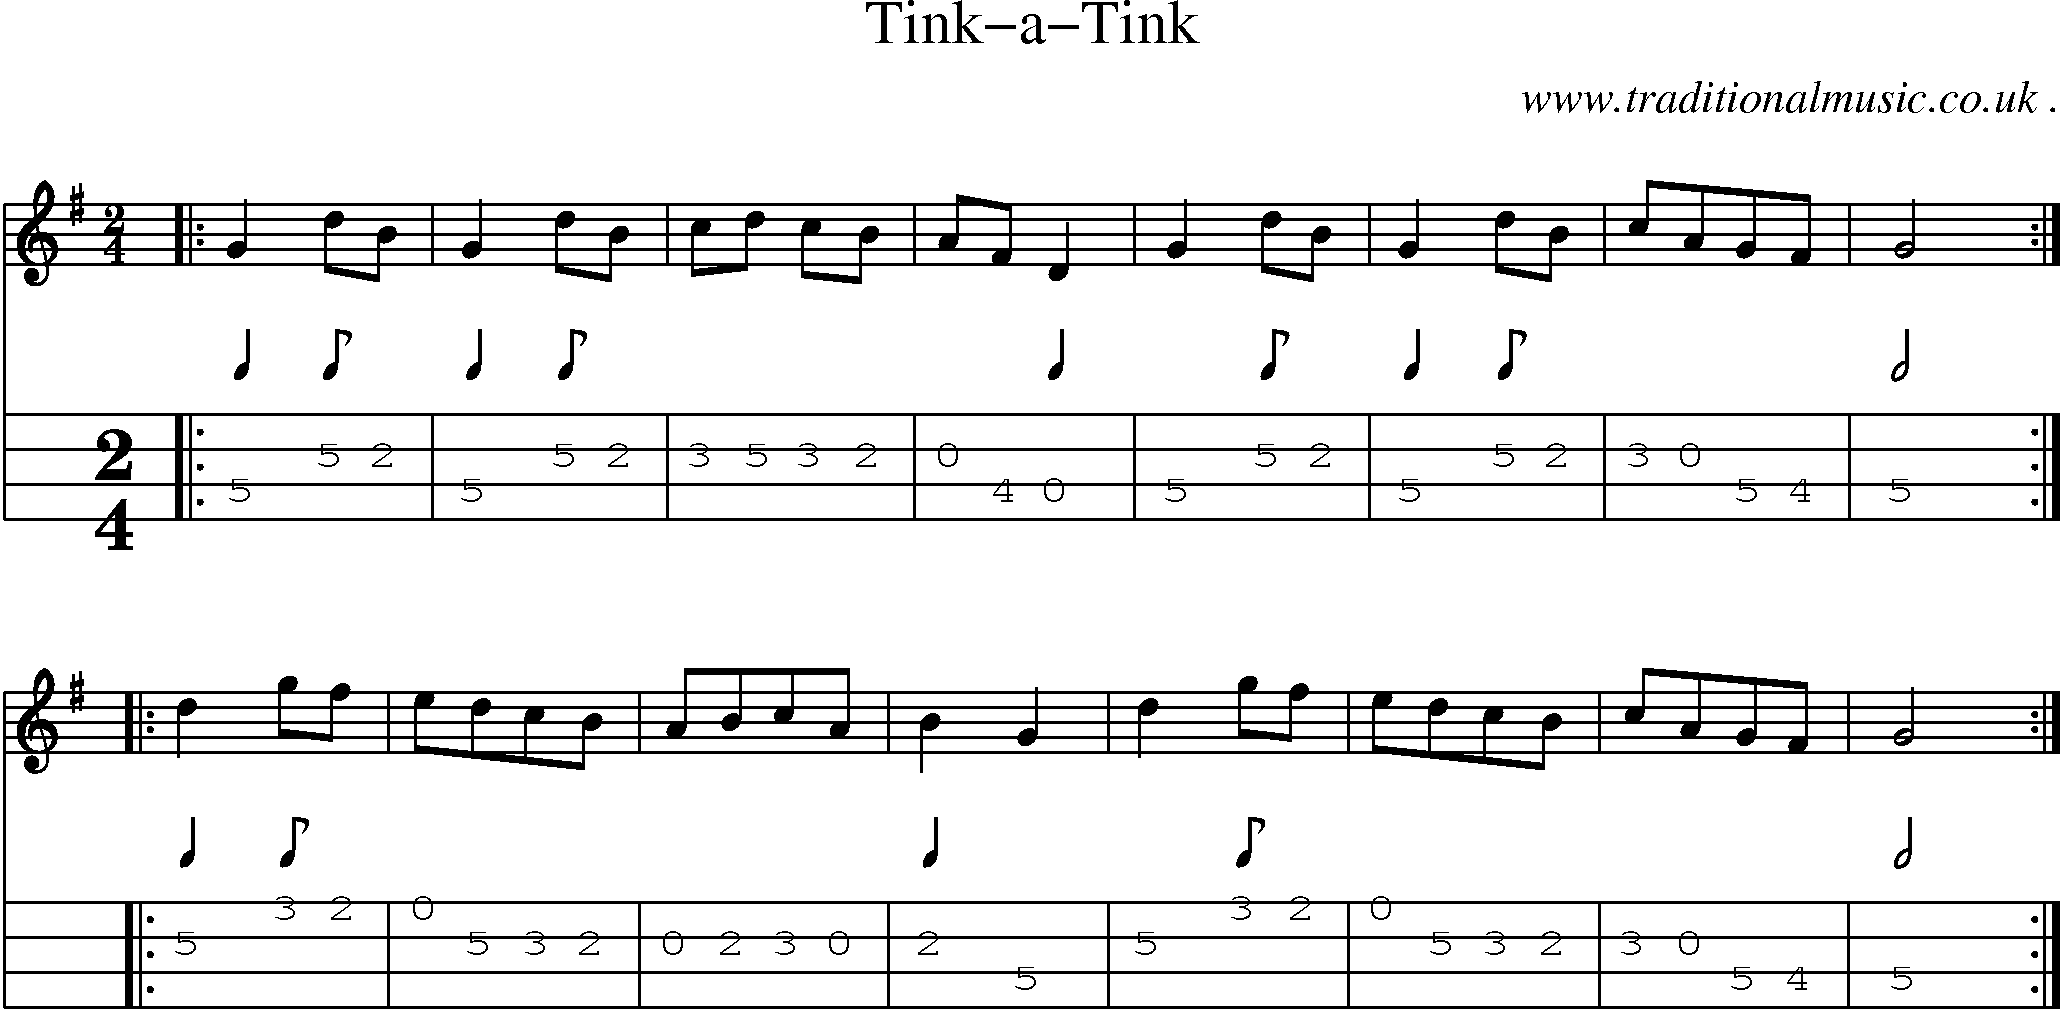 Sheet-Music and Mandolin Tabs for Tink-a-tink